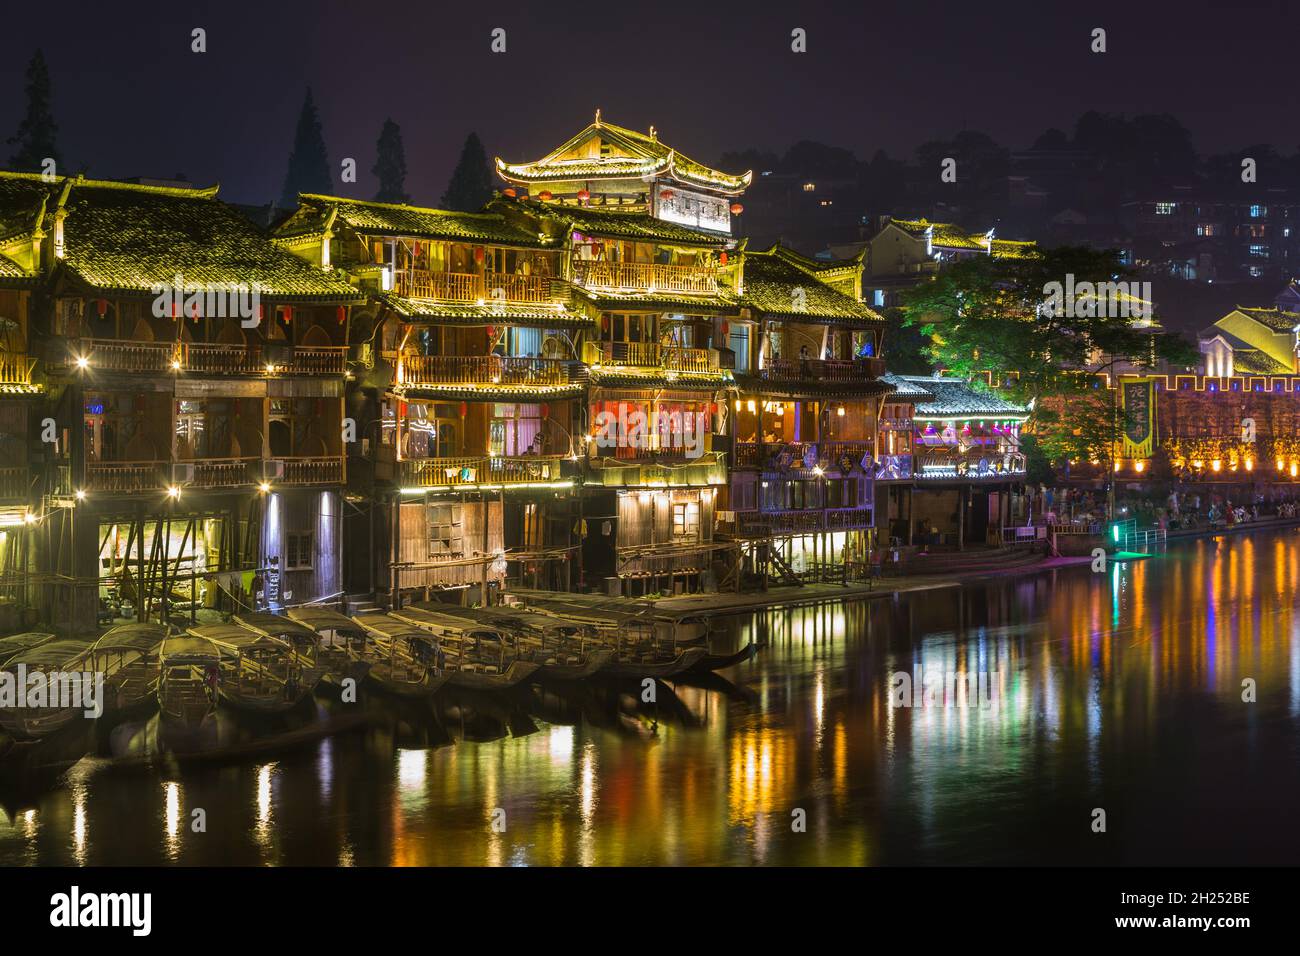 Traditional Diaojiao-style buildings on stilts lit up at night on the Tuojiang River in Fenghuang, China. Stock Photo